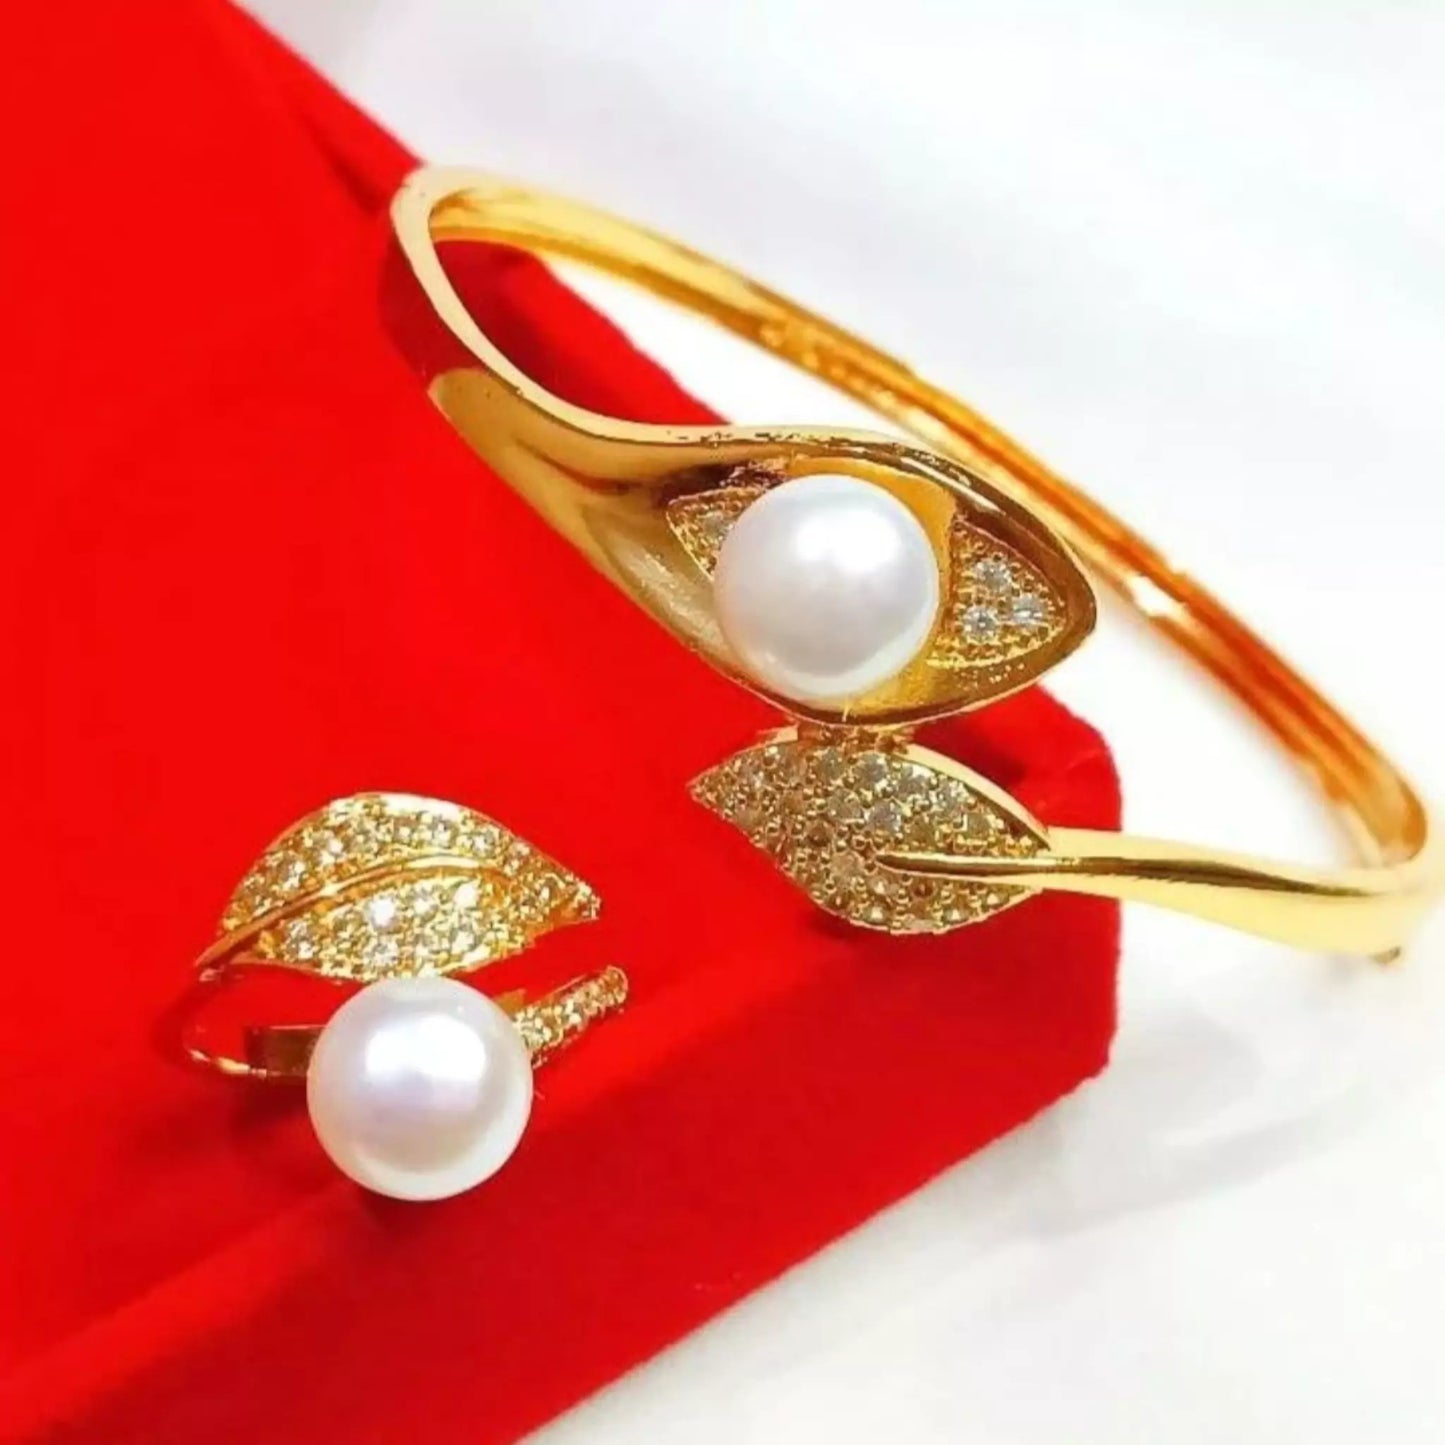 Super Quality Pearl Packages (Bracelets and Rings) For Sale